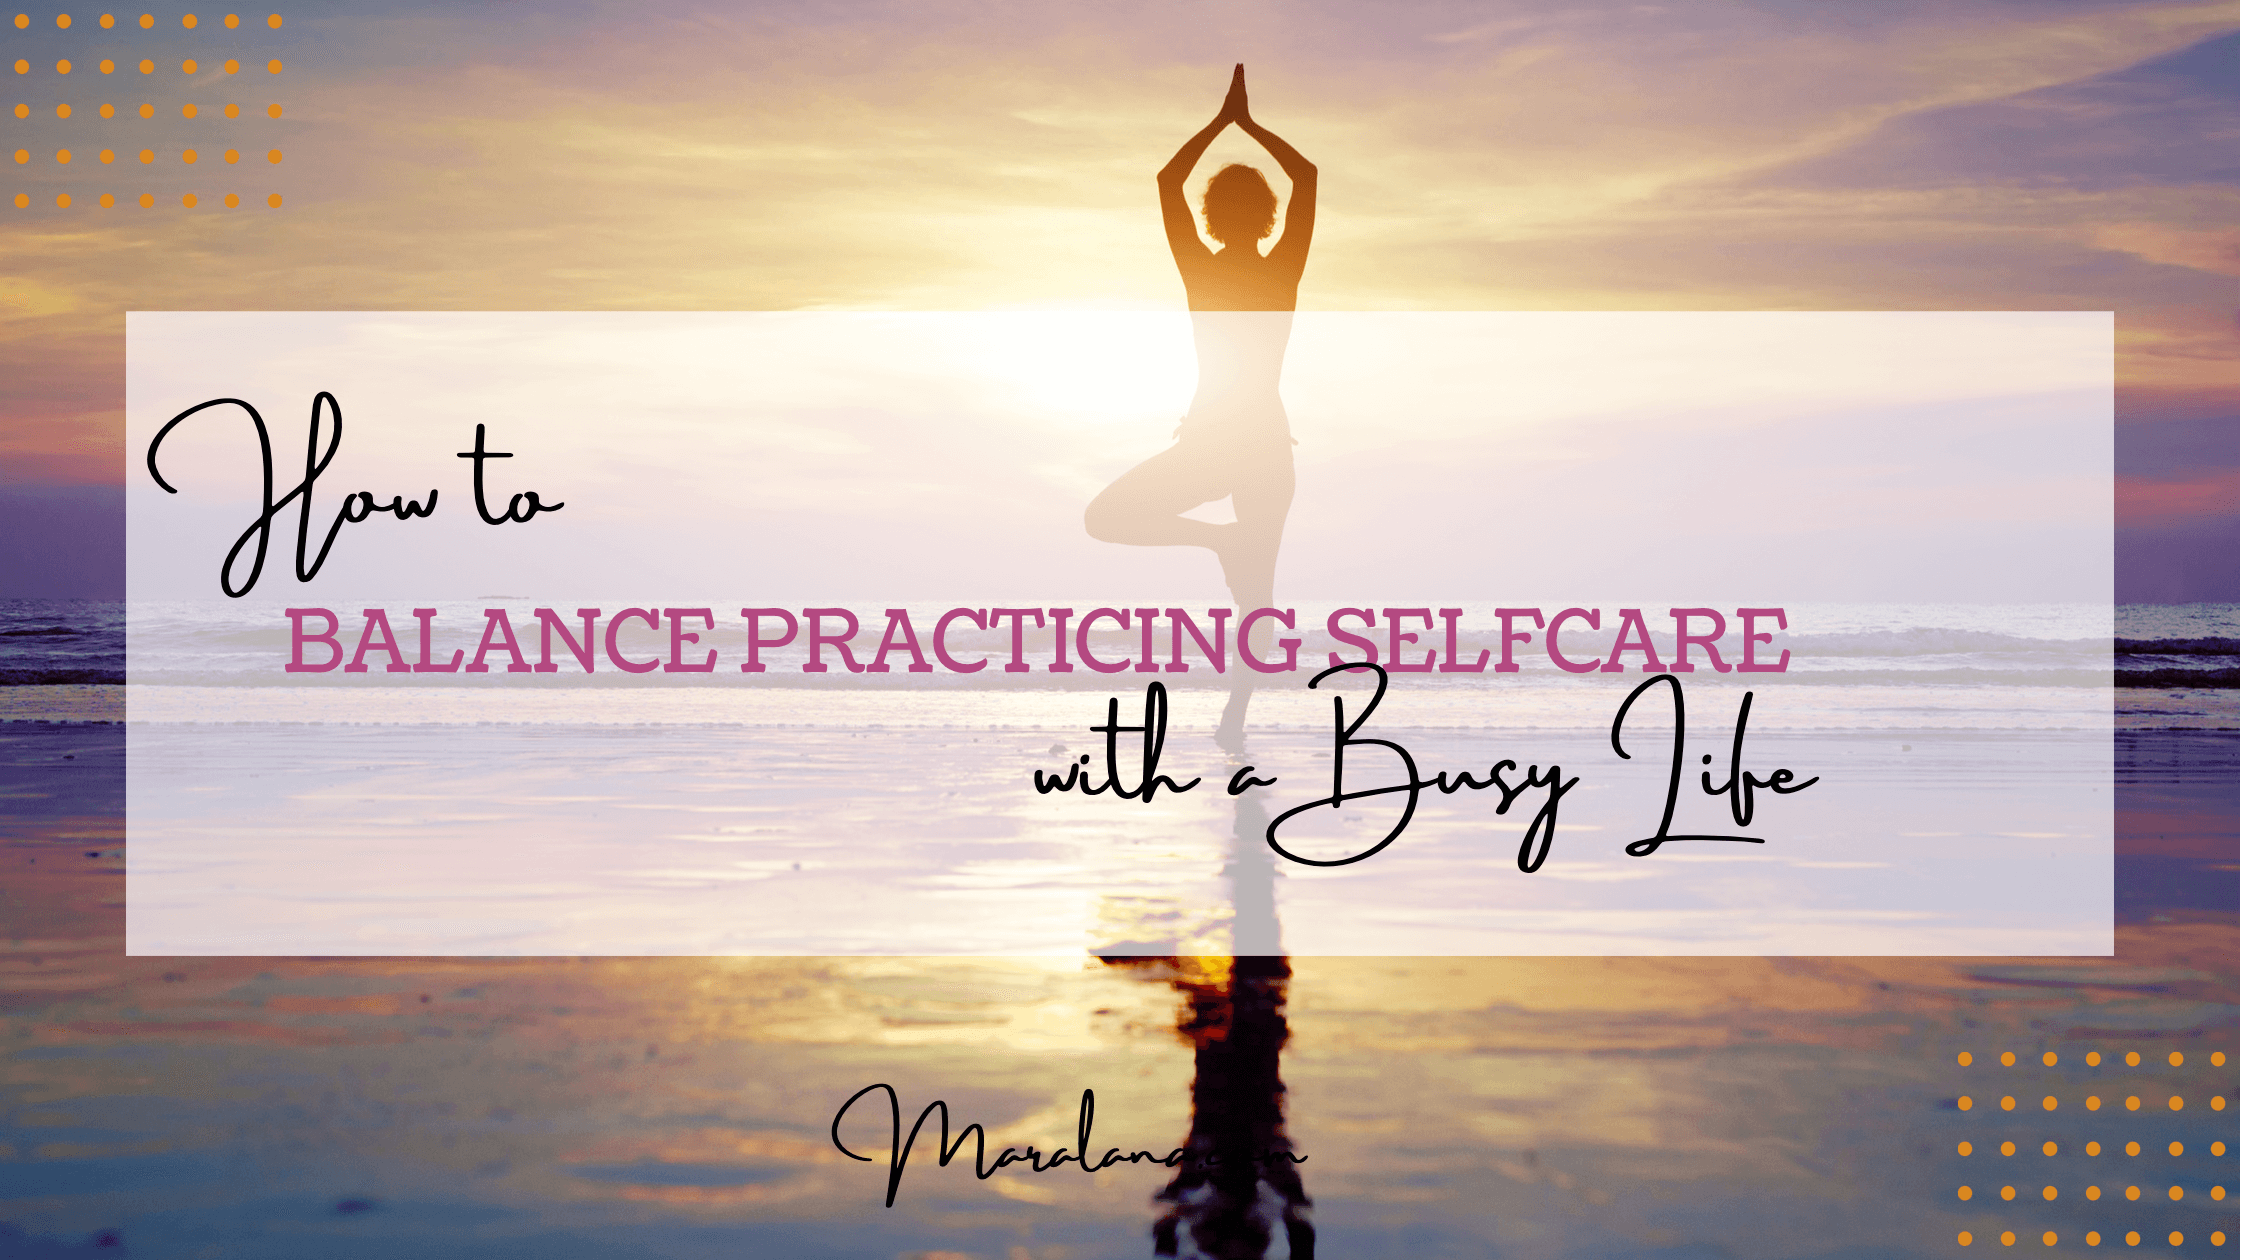 How to Balance Practicing Personal Self Care with a Busy Life